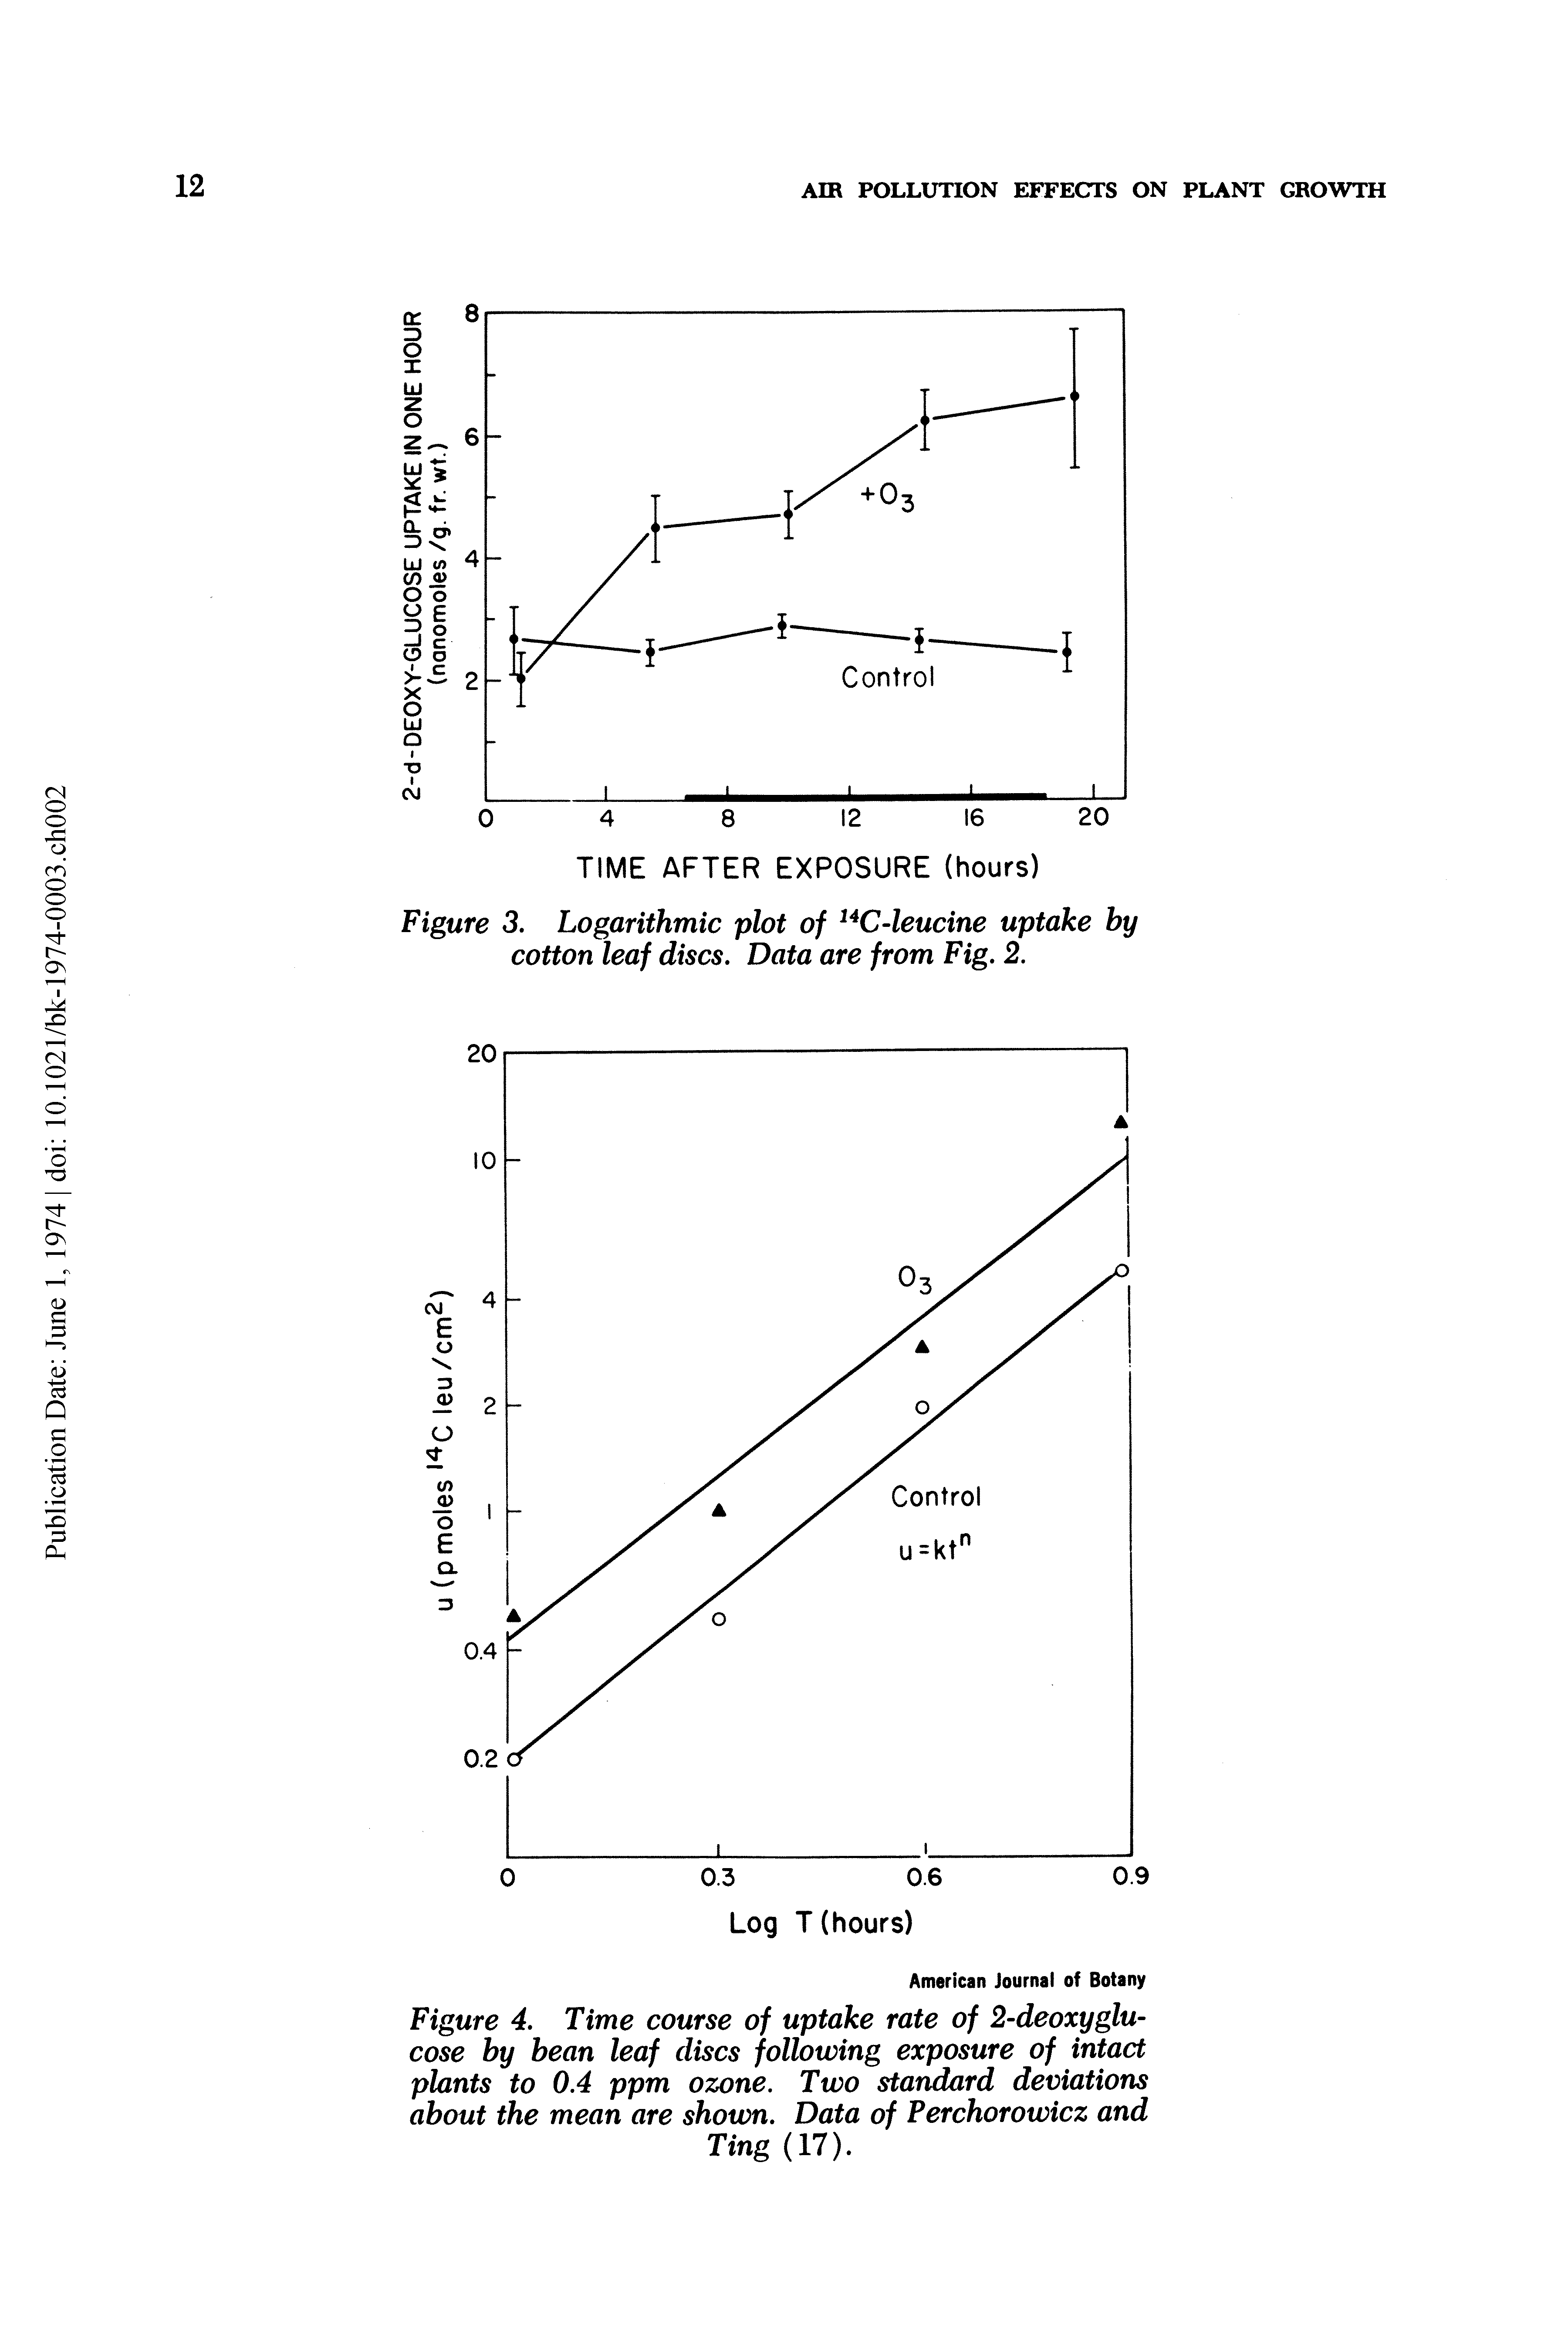 Figure 4. Time course of uptake rate of 2-deoxyglucose by bean leaf discs following exposure of intact plants to 0.4 ppm ozone. Two standard deviations about the mean are shown. Data of Perchorowicz and Ting (17).